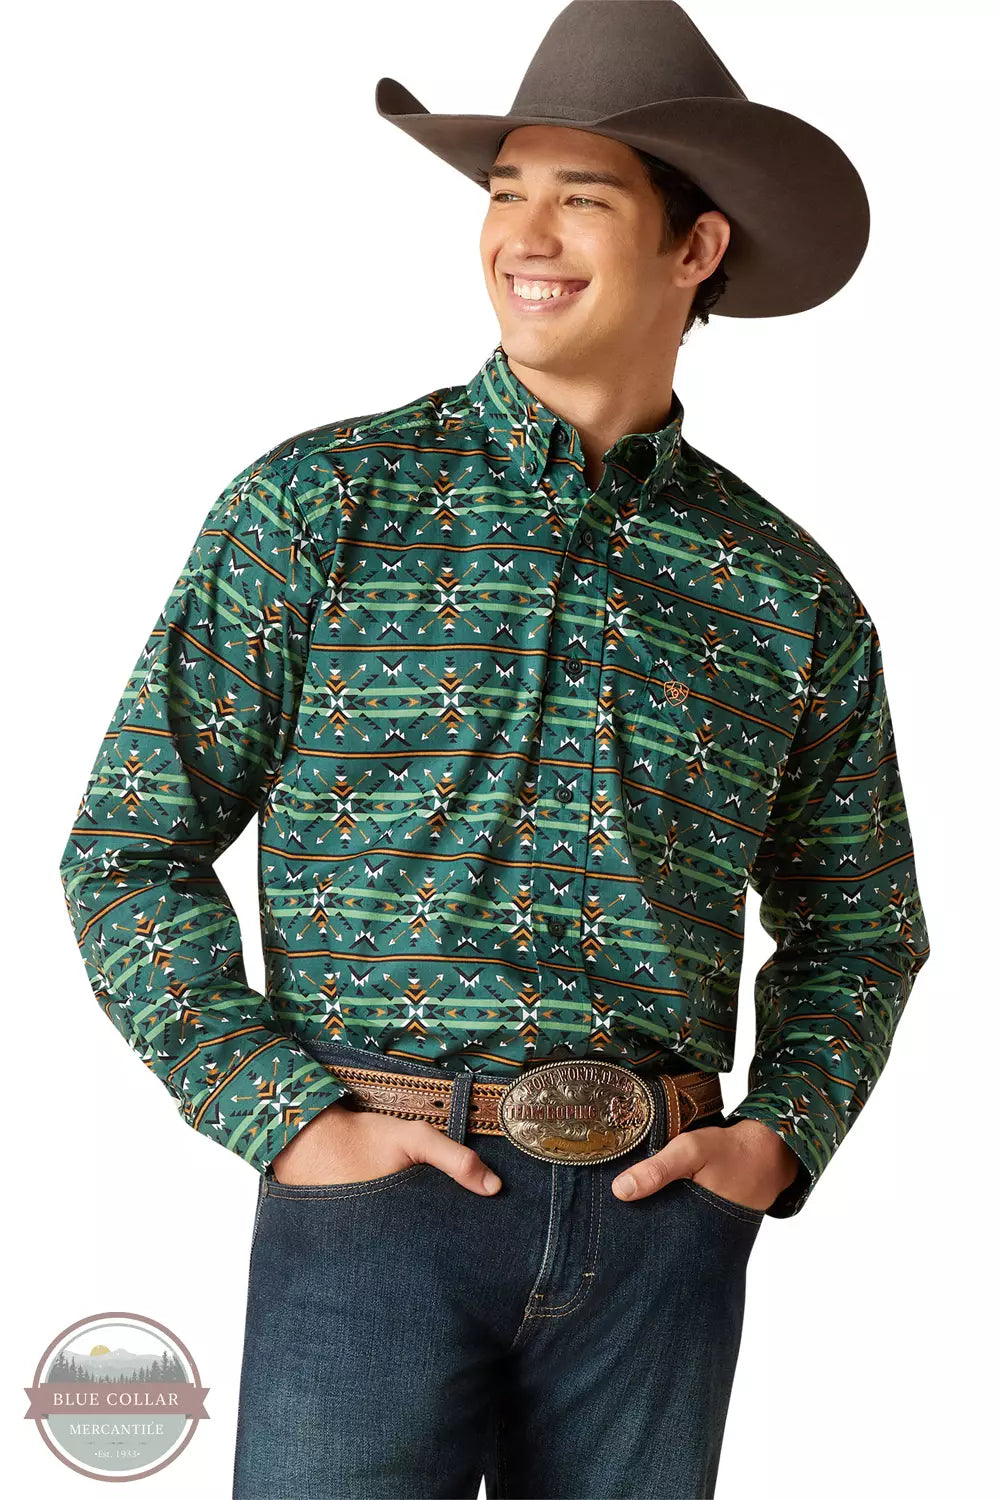 Ariat 10047187 Emmanuel Classic Fit Long Sleeve Shirt in Green Print Front View